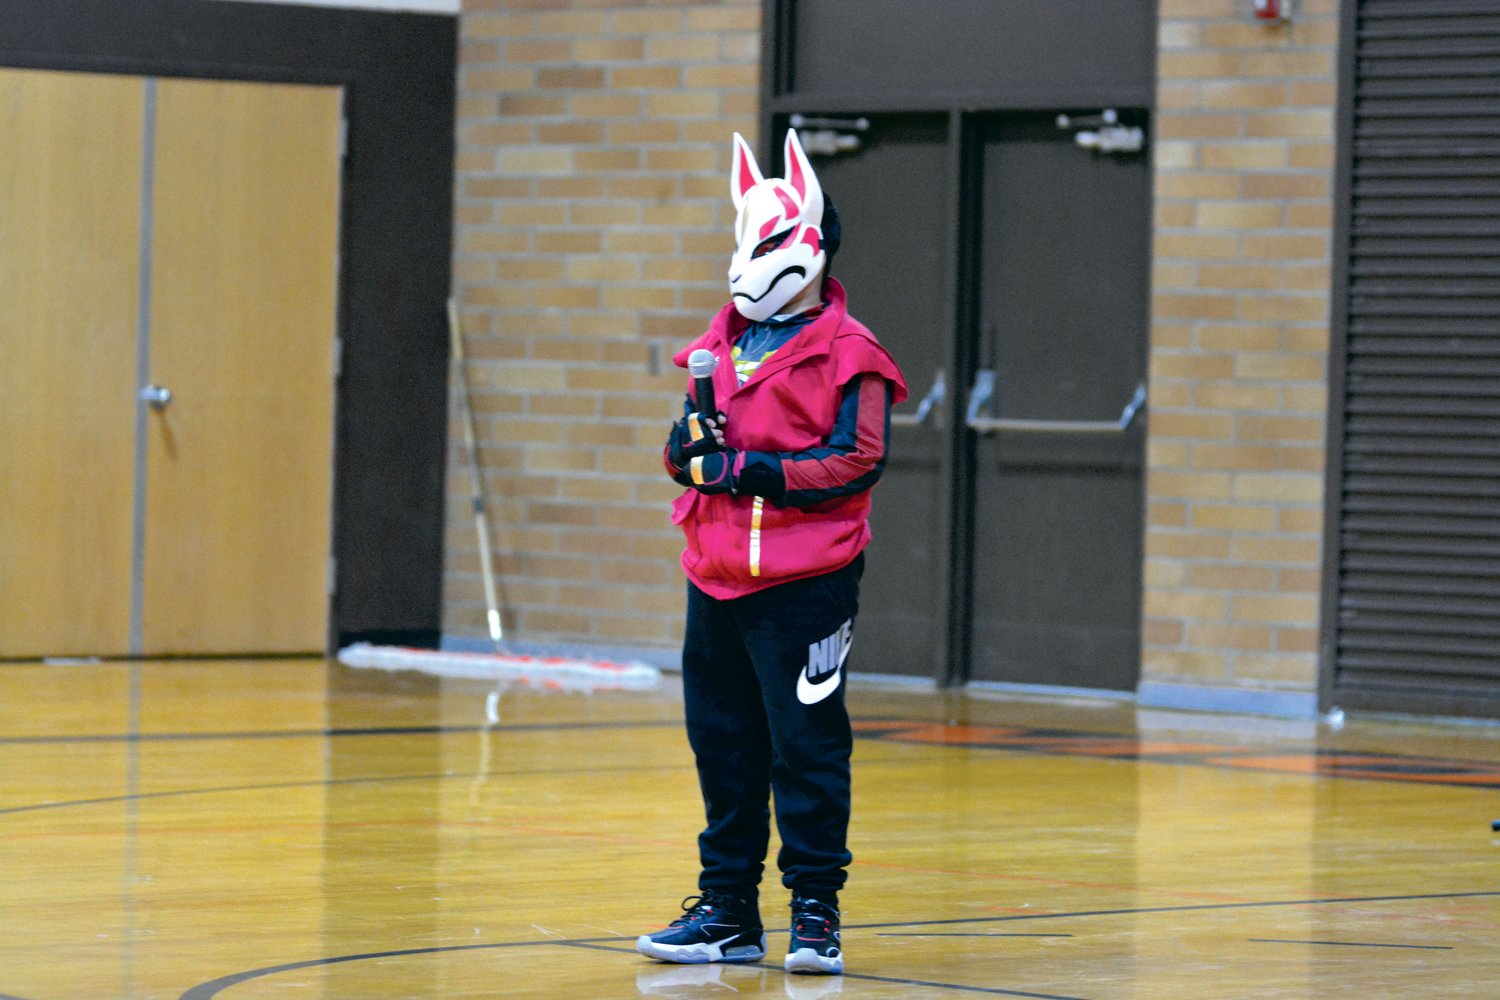 Gustavo Diaz performs a song parodying the popular video game Fortnite at the Rainier Community Talent Show on May 14.